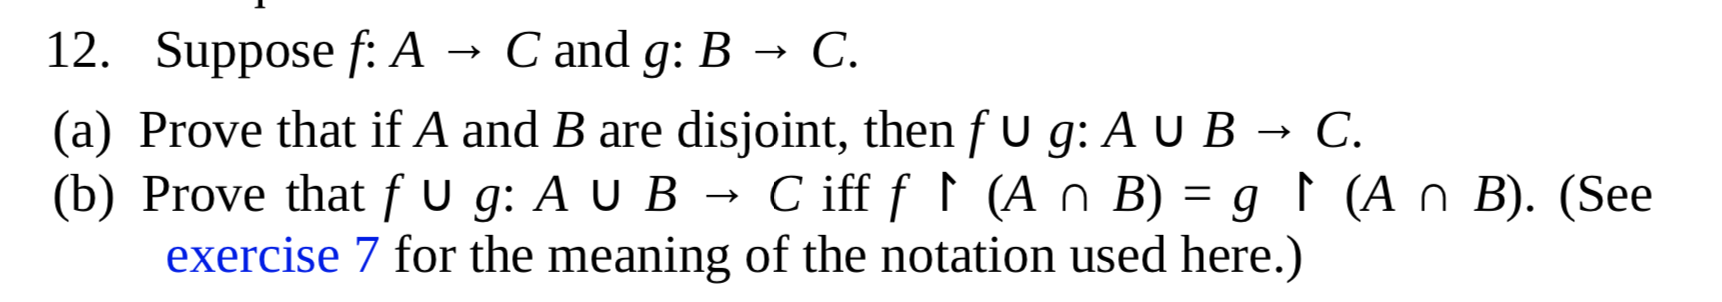 Suppose f: A
C and g: B → C.
Prove that if A and B are disjoint, then f U g: A U B → C.
Prove that f u g: A U B → C
exercise 7 for the meaning of the notation used here.)
C iff f ↑ (A n B) = g ↑ (A n B). (See
